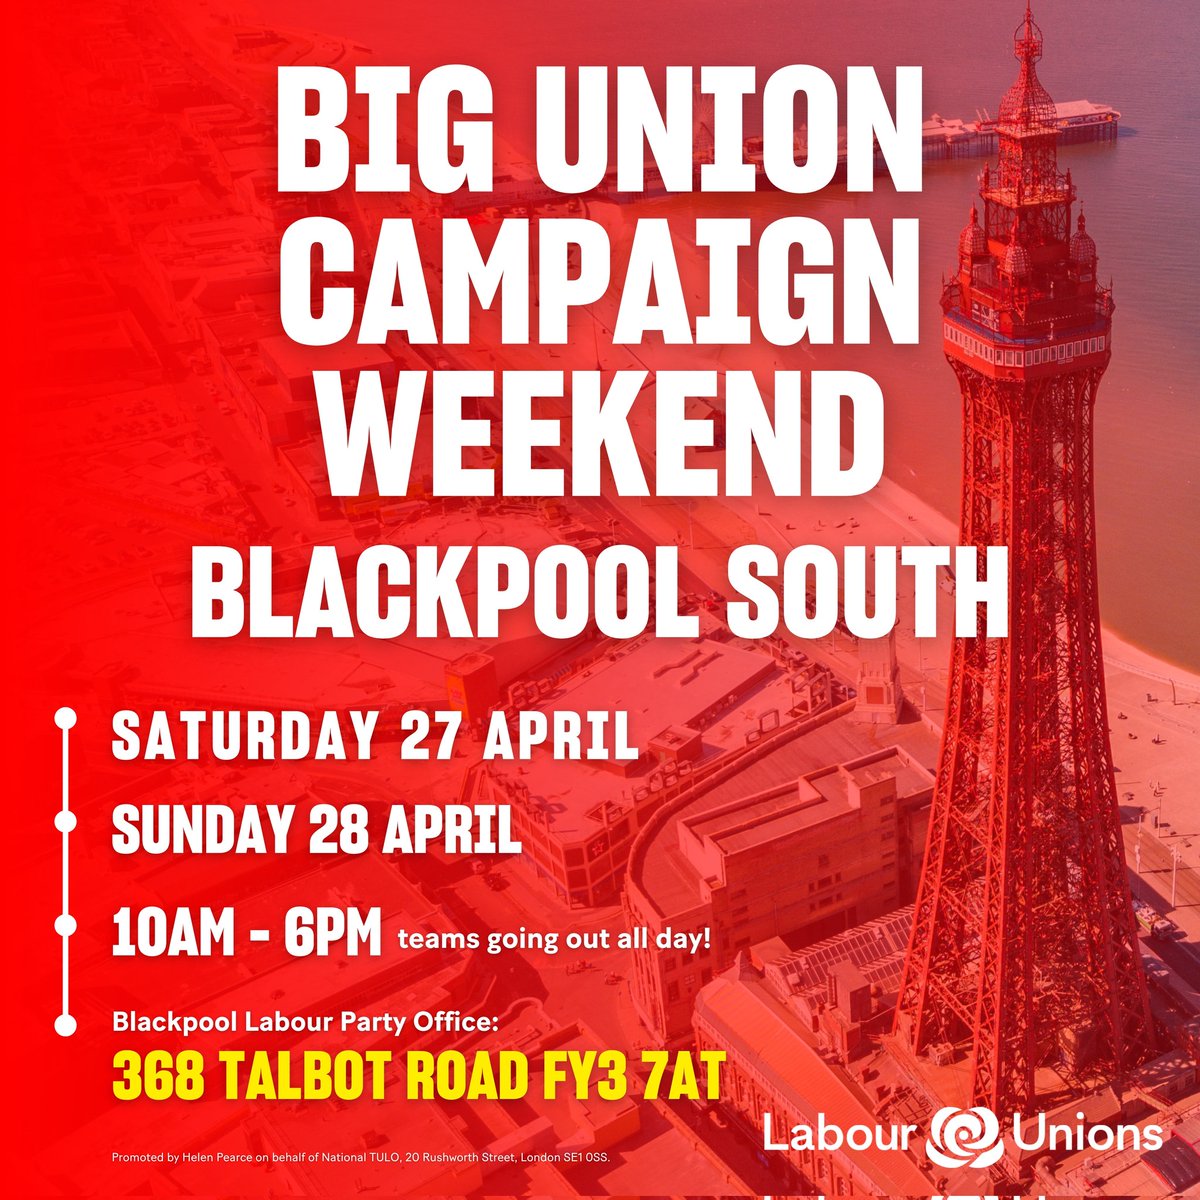 Next weekend, Sat 27th & Sun 28th April @labourunionsuk will be holding a 'Big Union Campaign Weekend' to support @ChrisPWebb Labour's candidate for the Blackpool South By-Election. For more details and to sign up, please visit the link below 👇 labourunions.org.uk/blackpool/